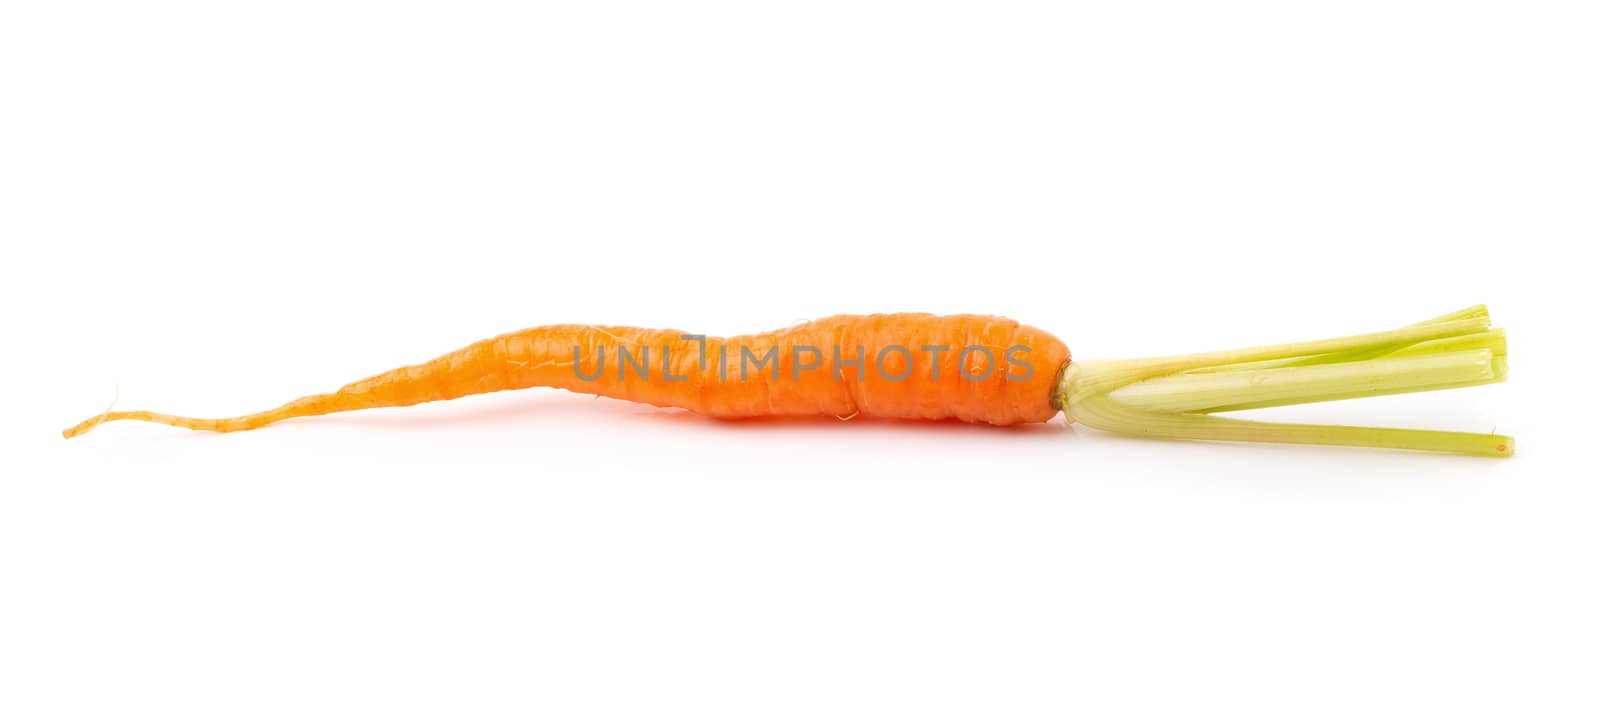 Fresh baby carrots isolated on a white background by kaiskynet